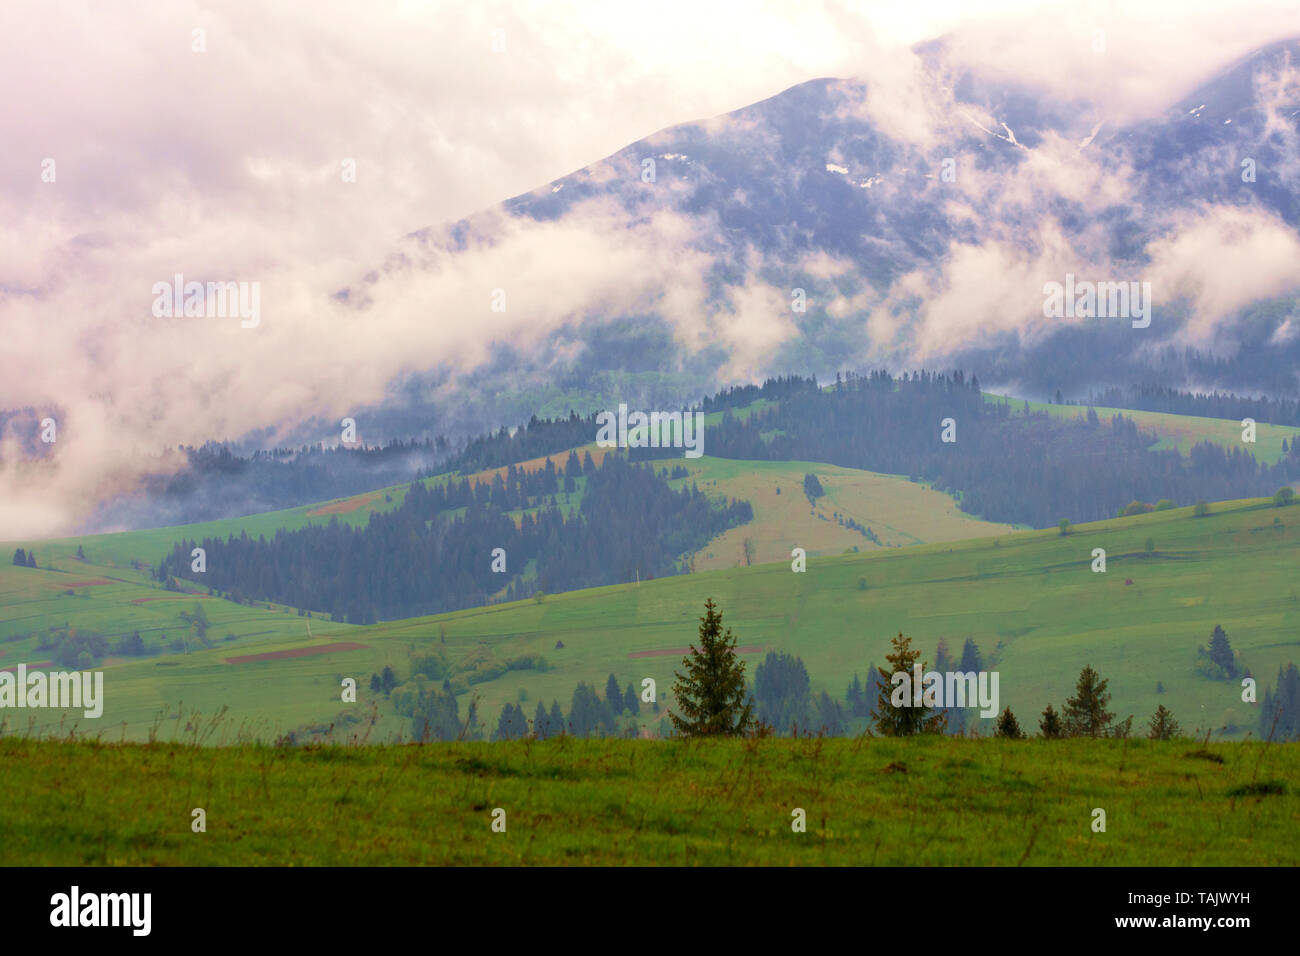 The torn clouds of morning fog slowly descend along the slopes of the Carpathian Mountains into the forest green valleys in the early spring morning. Stock Photo